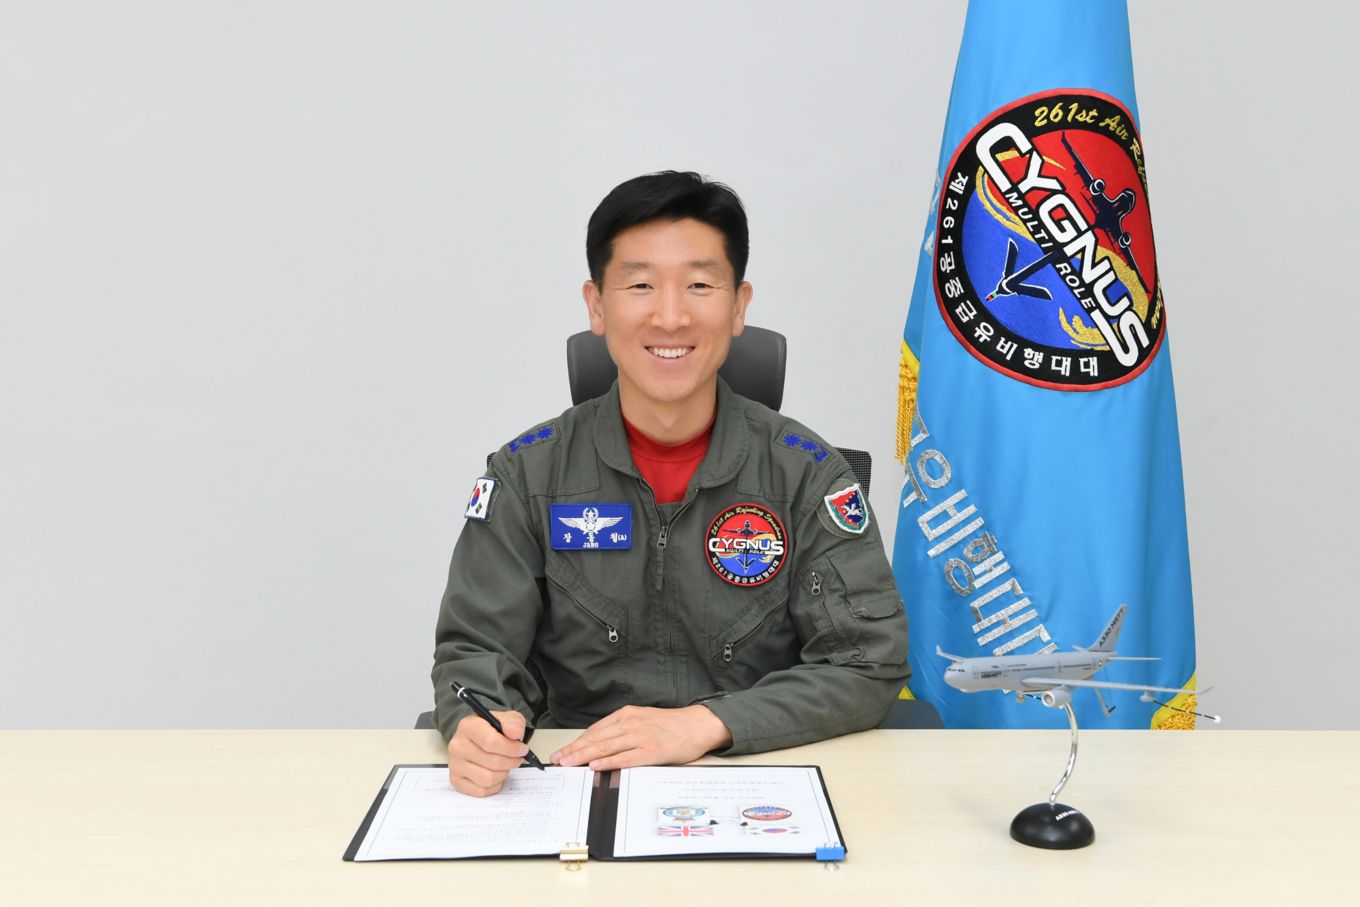 Commander Lieutenant Colonel Jang Dongchul signs the Memorandum of Understanding, with a statue of the Airbus Tanker and flag in the background.